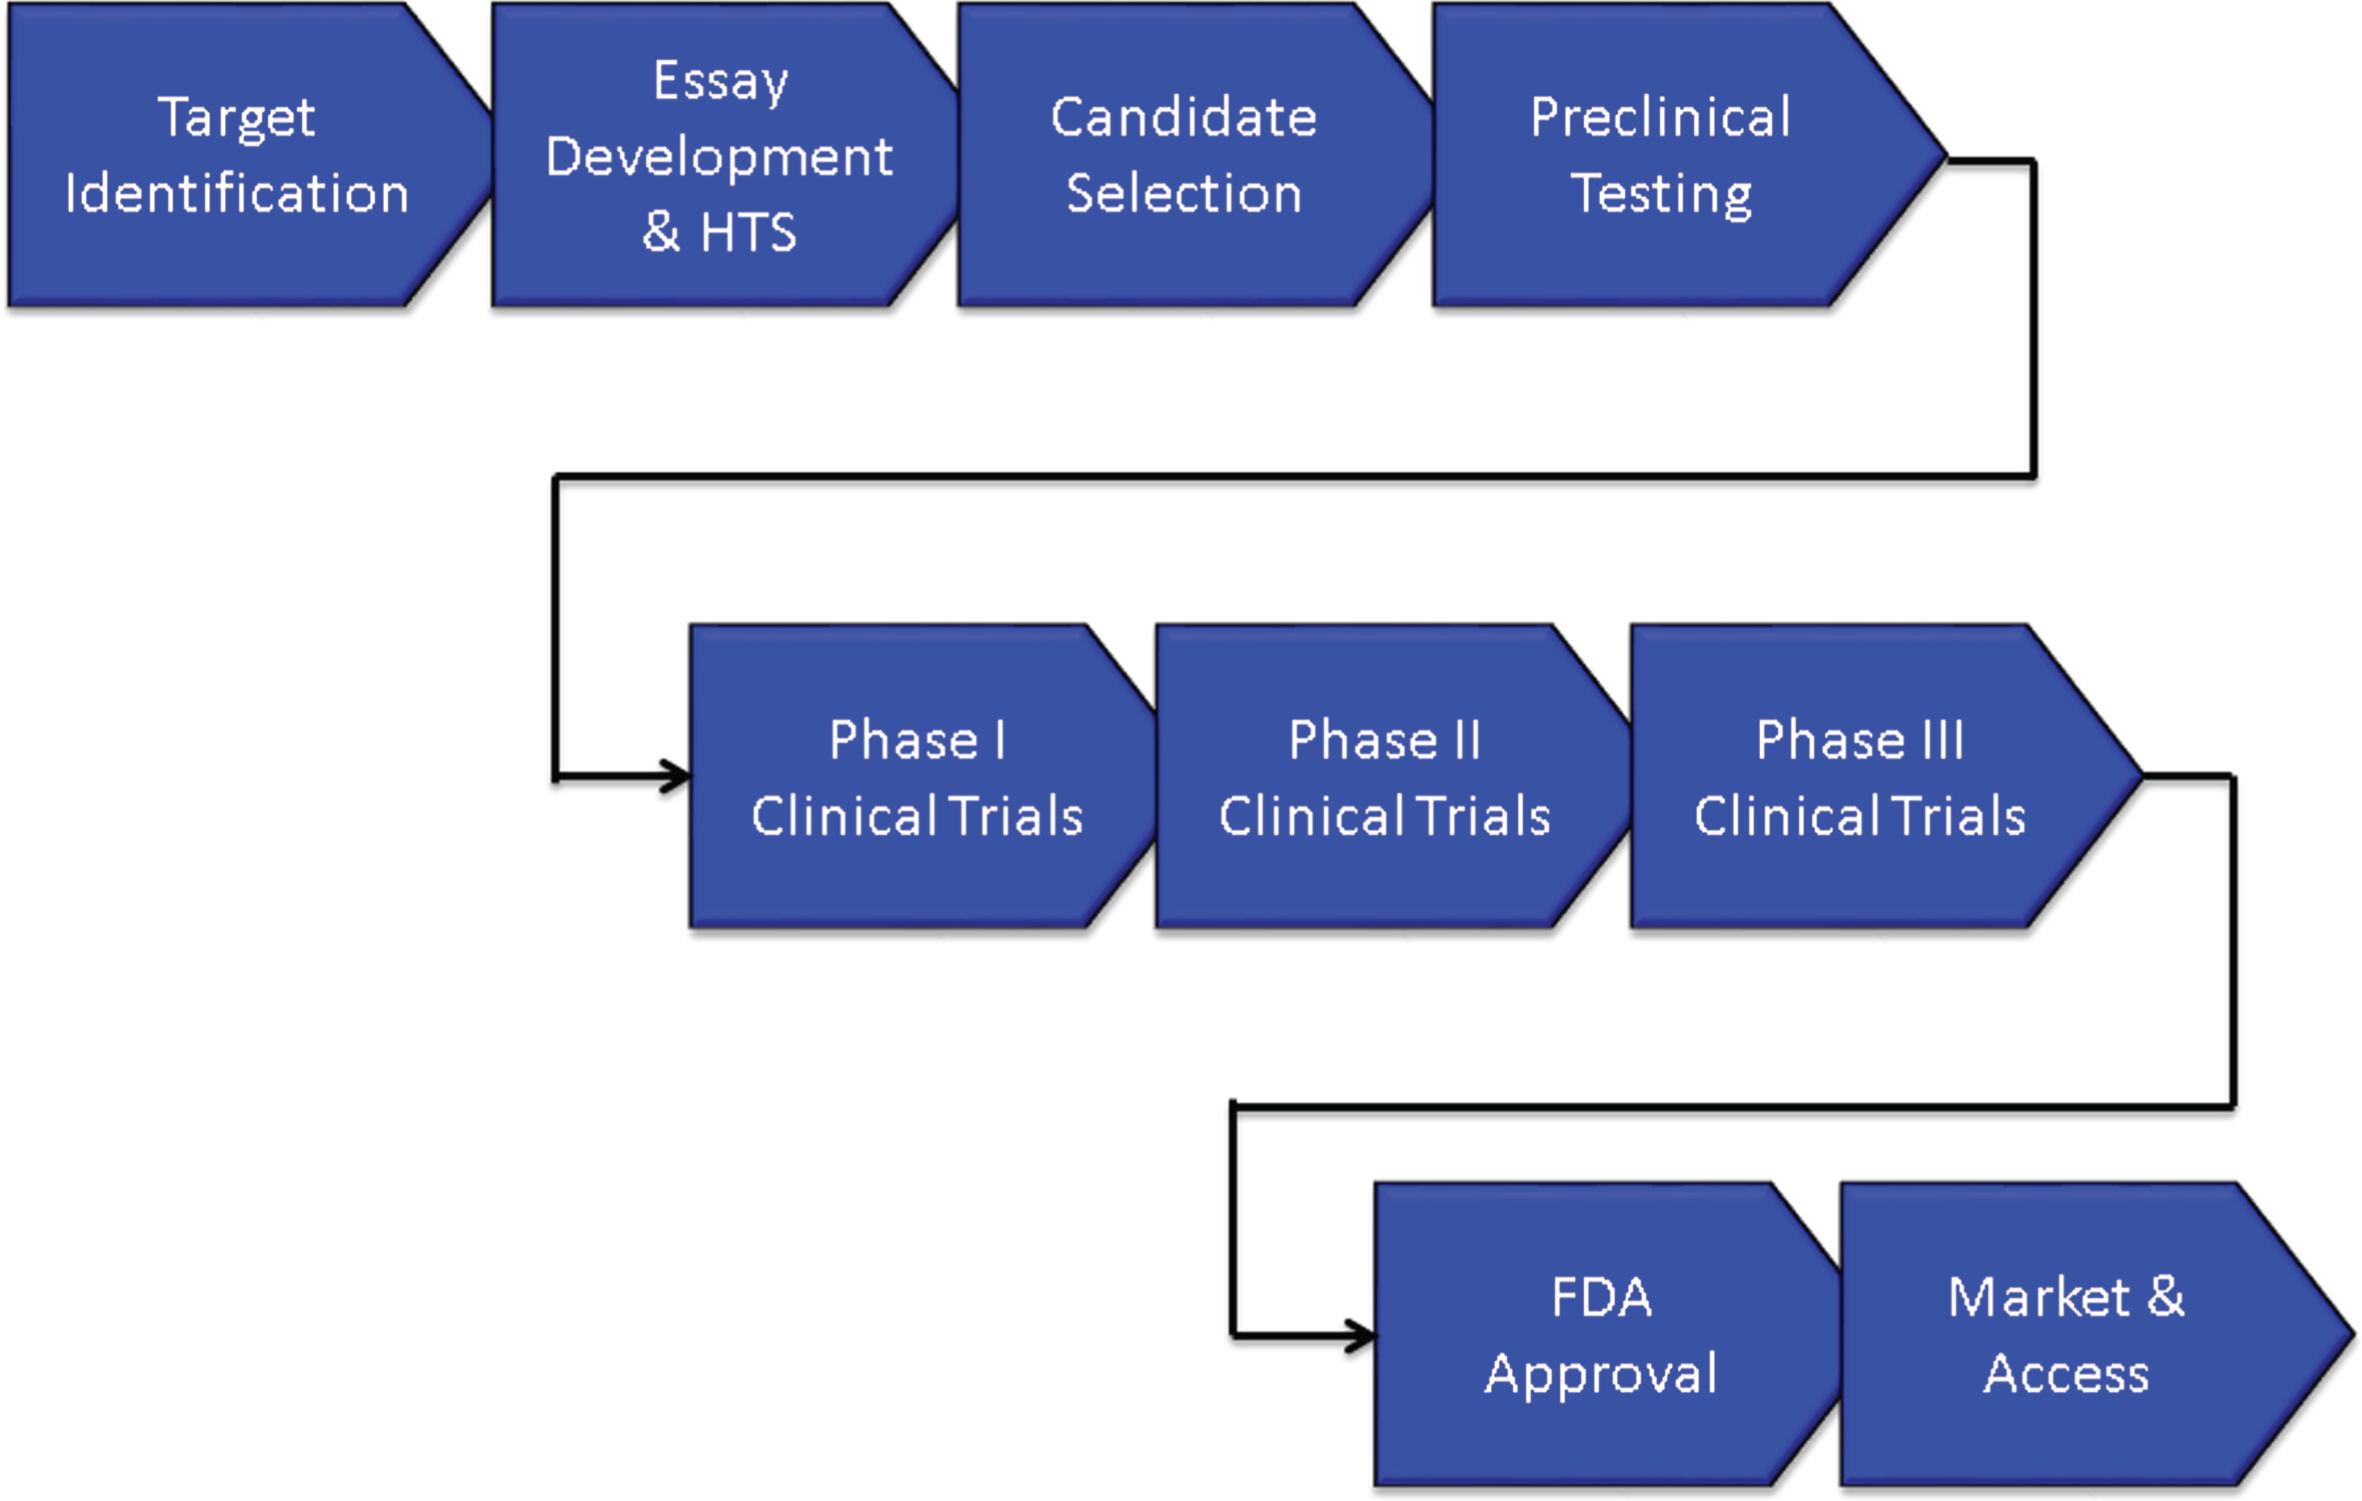 Overview of the drug development process.